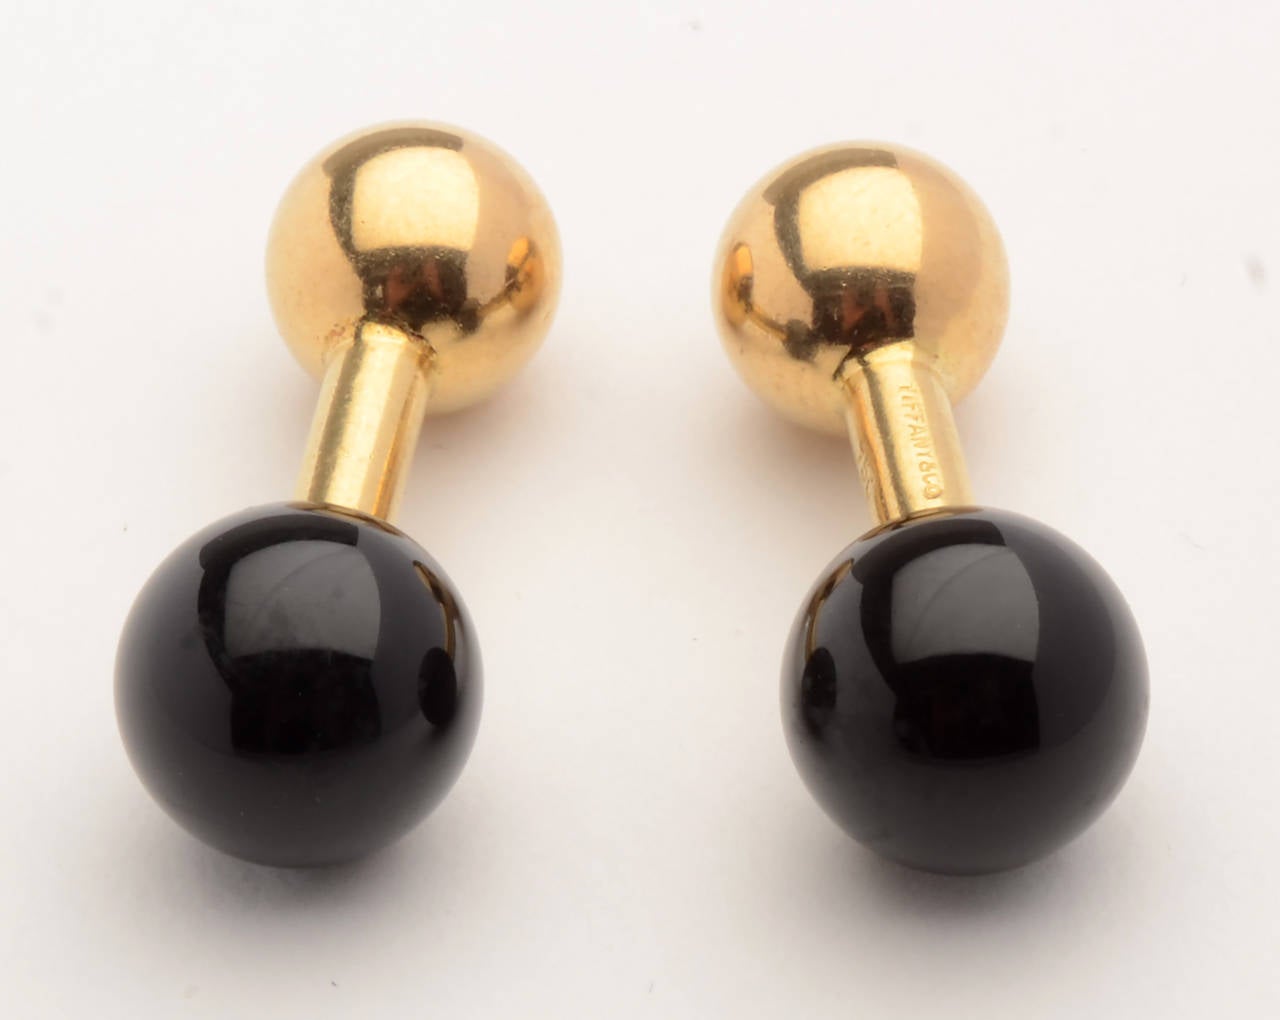 Classic 18 karat gold barbell cufflinks by Tiffany and Co. with a black onyx ball reversing to a gold one. The onyx is 7/16